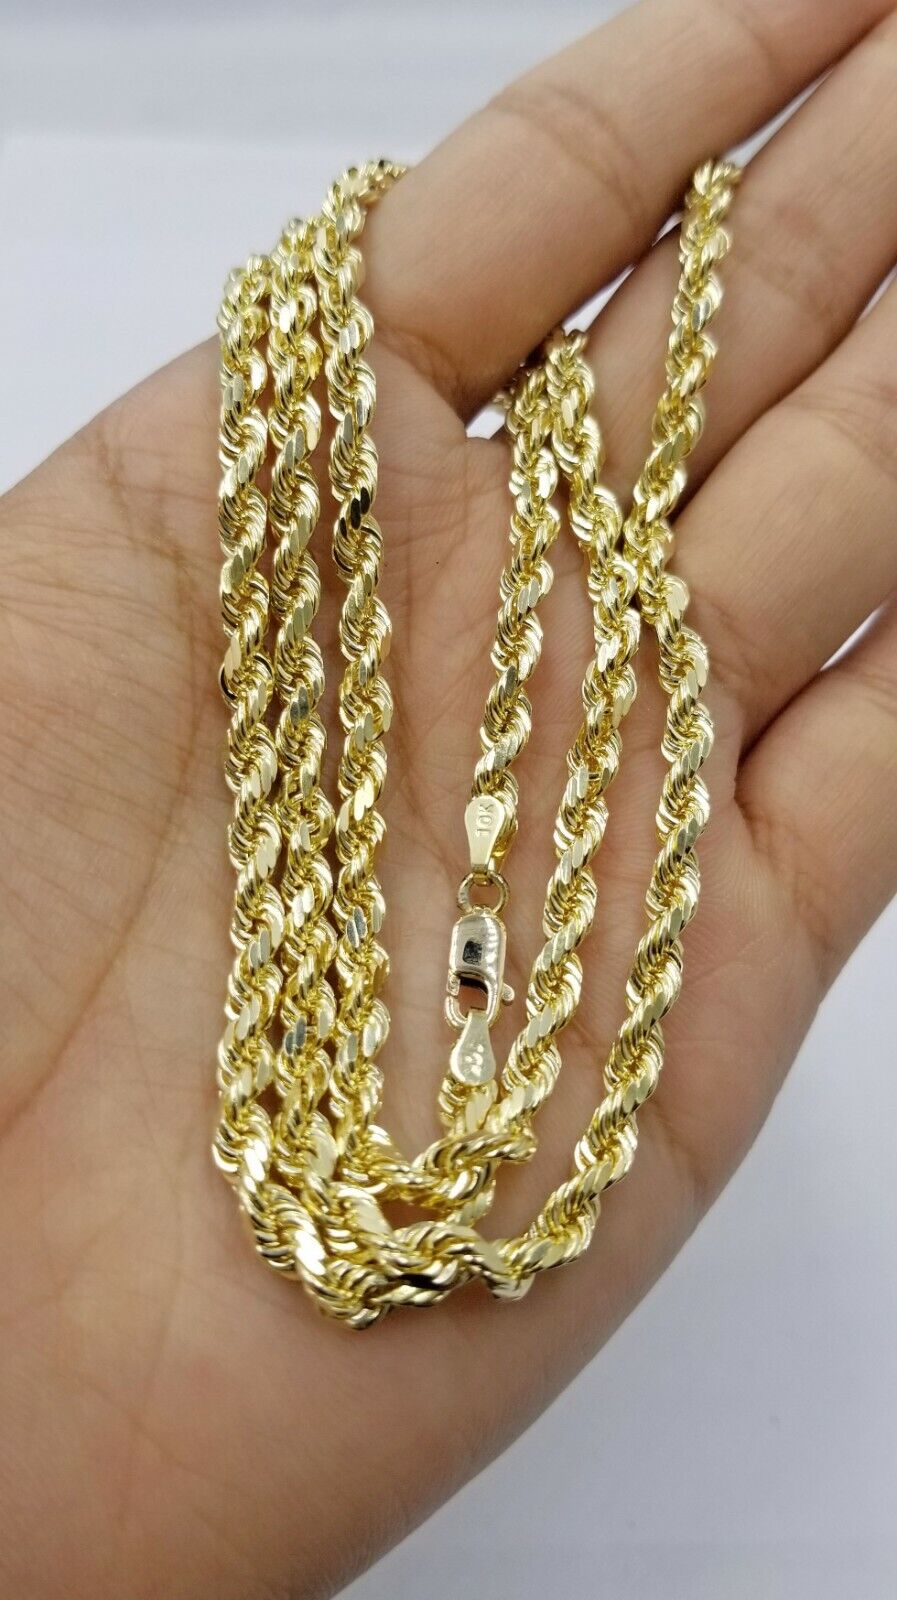 SOLID 10k Yellow Gold Rope Chain Diamond Cut 4mm 18" Ladies Brand new Chain Real